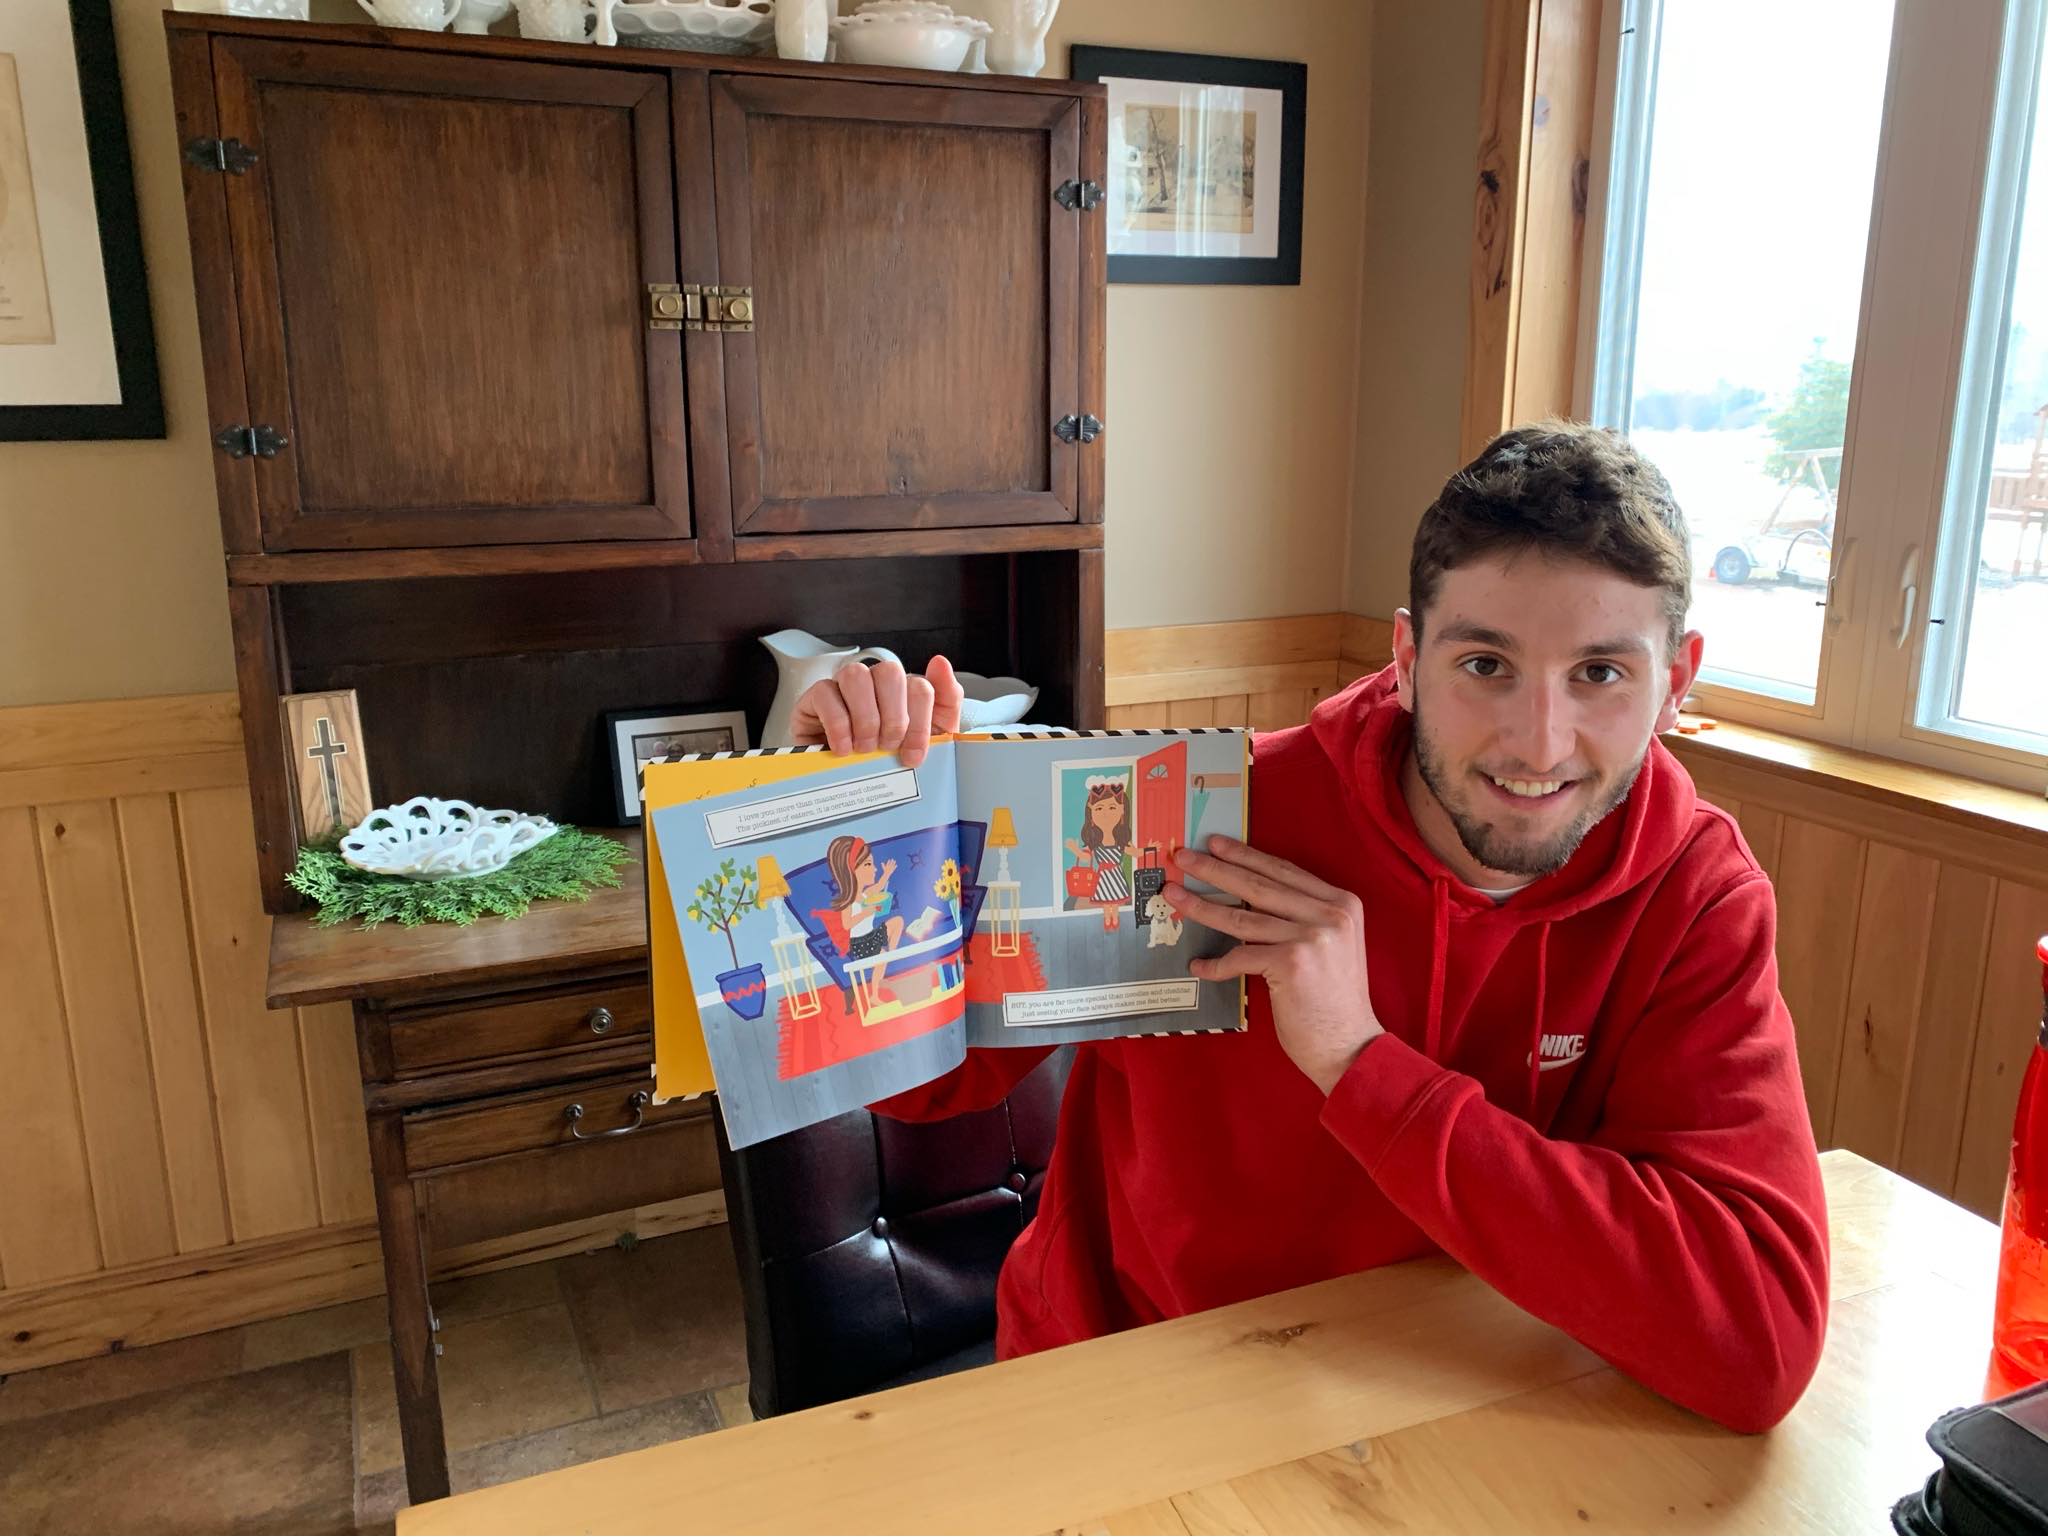 High school student Oscar Telschow with picture book for story time